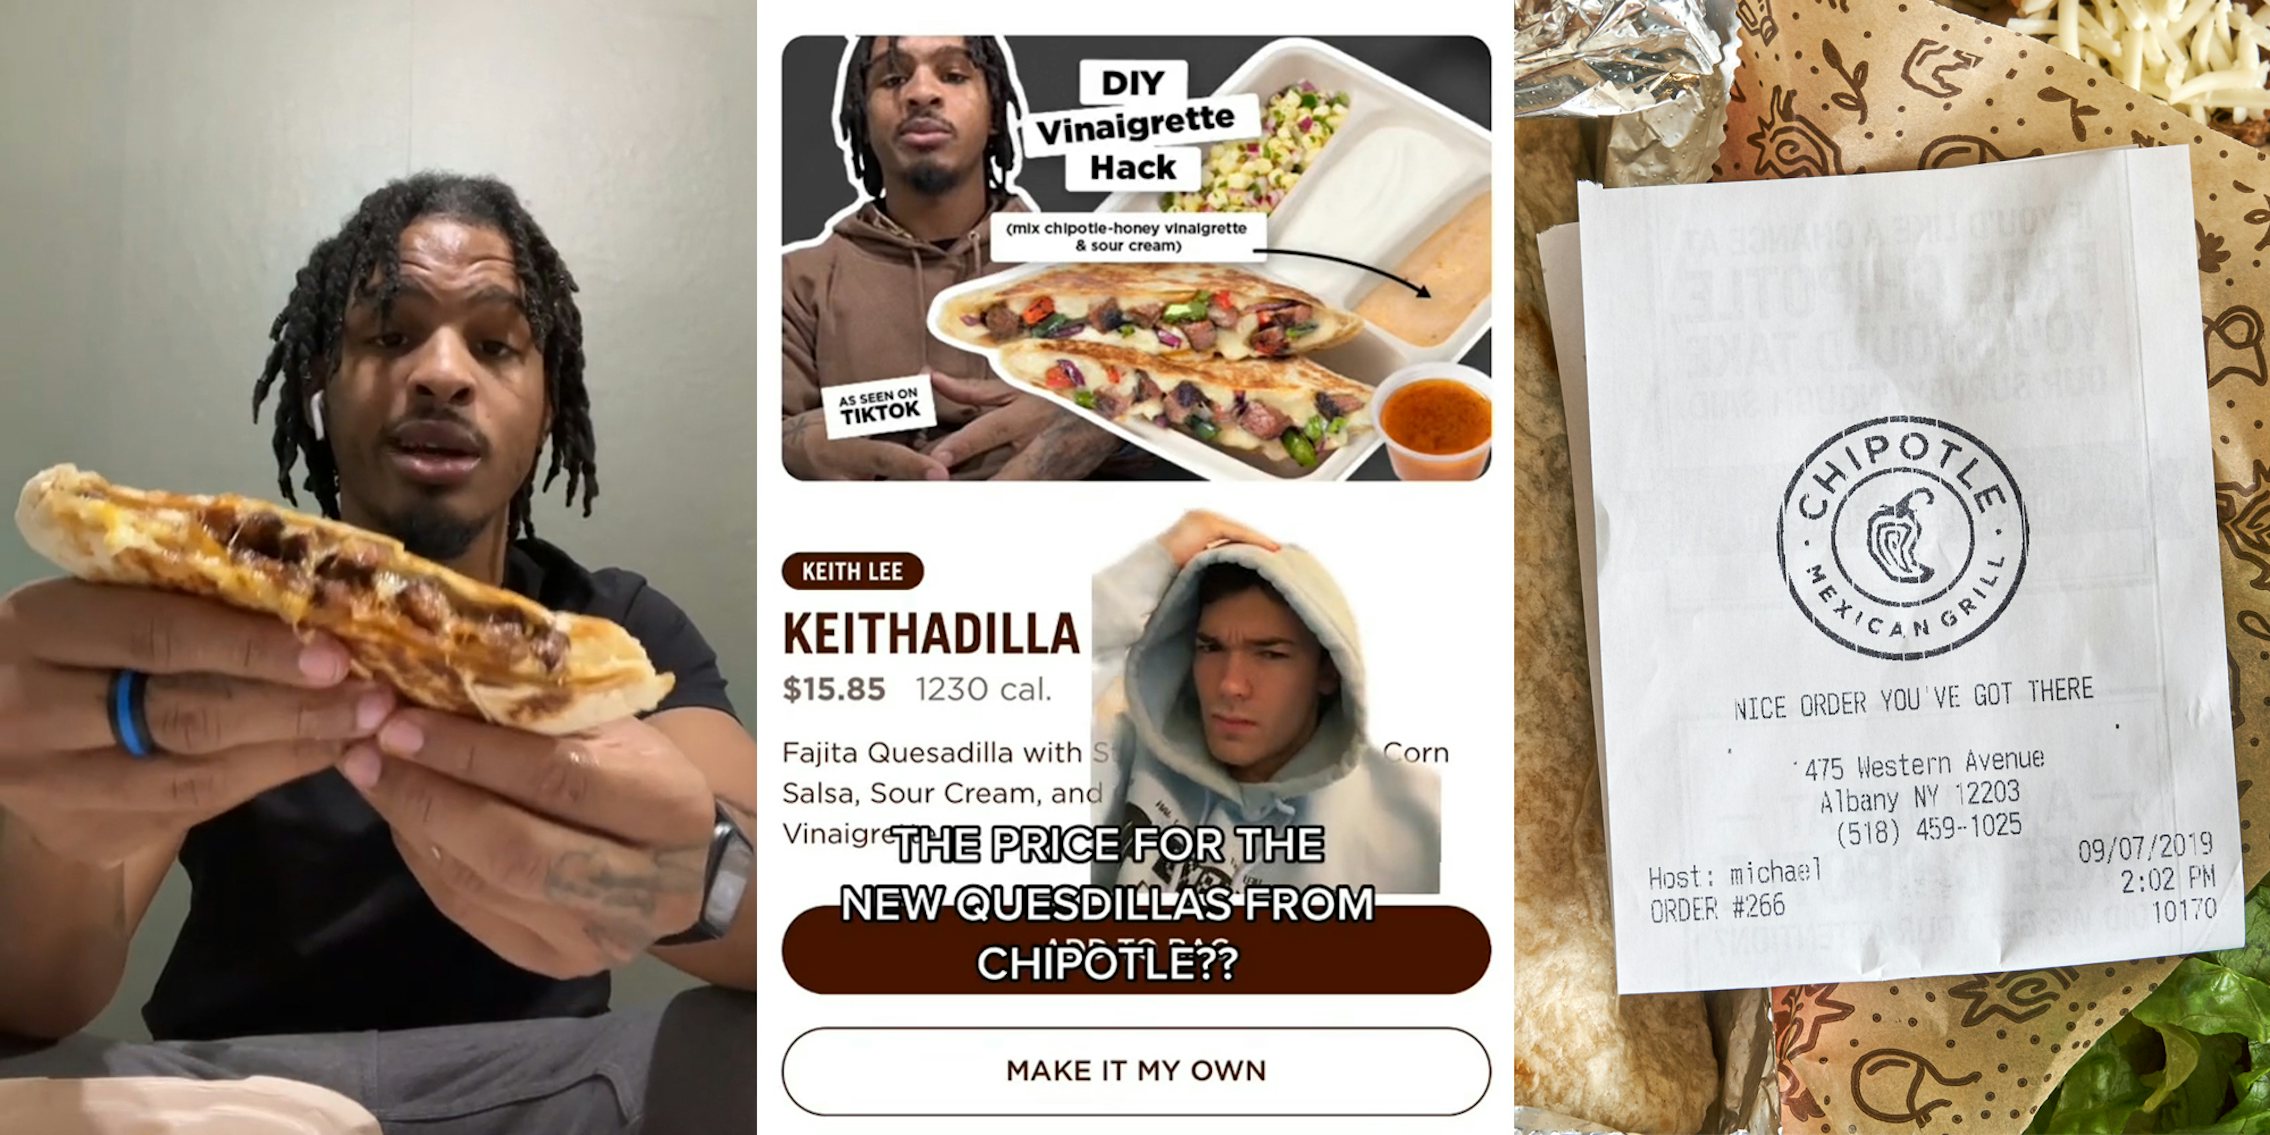 Keith Lee holding up Keithadilla (l) person greenscreen TikTok over Chipotle's Keithadilla ad with caption 'THE PRICE FOR THE NEW QUESADILLAS FROM CHIPOTLE??' (c) Chipotle receipt on food (r)